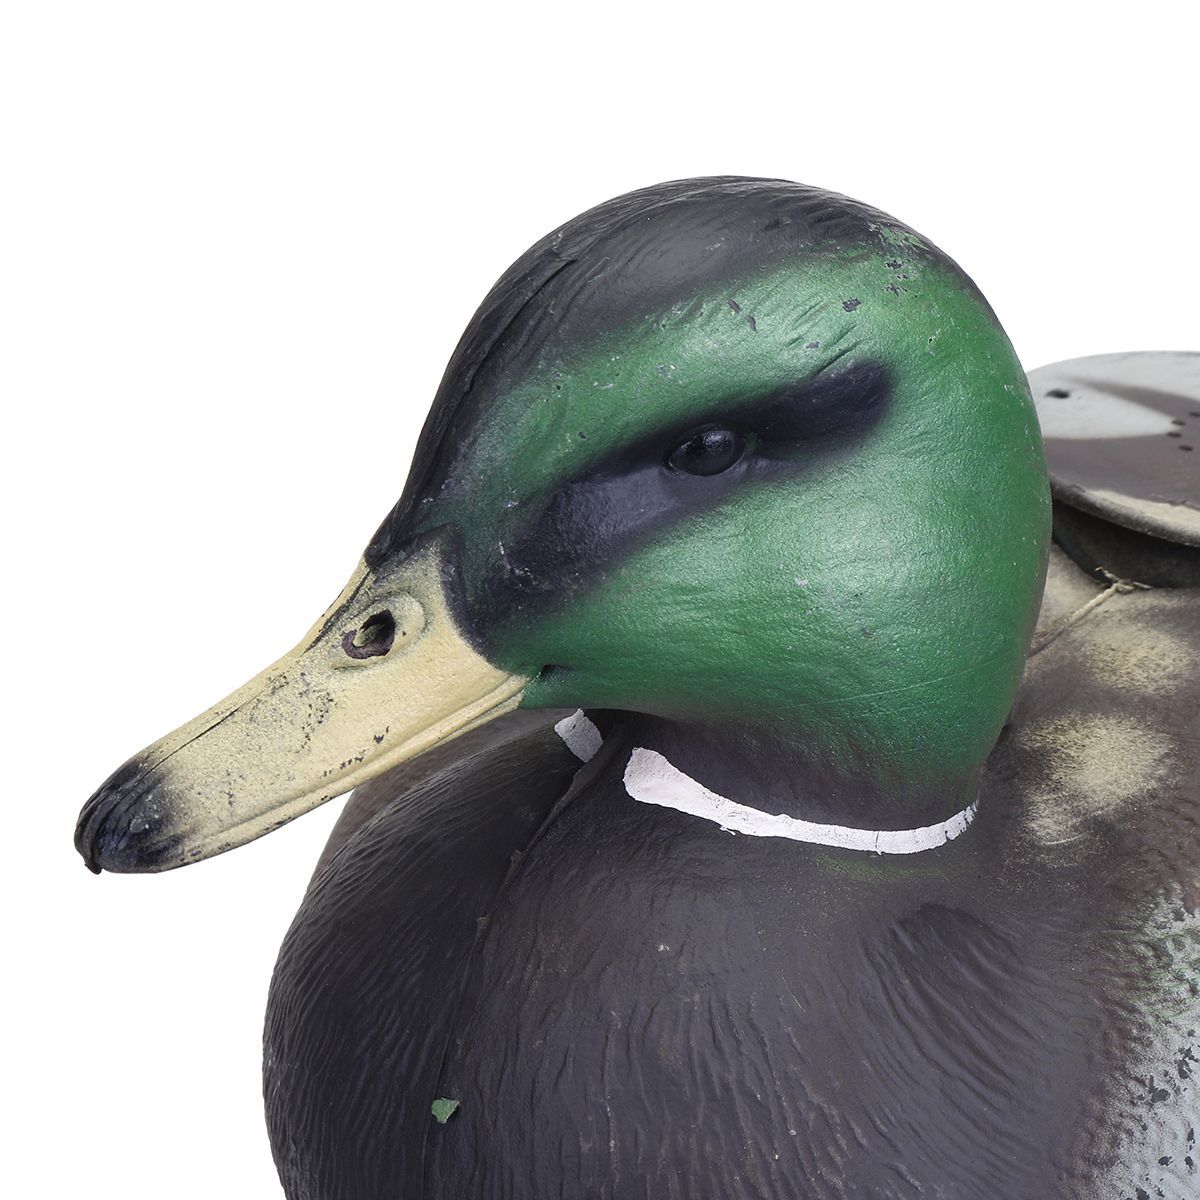 Floating-Mallard-Duck-Deadly-Fishing-Lure-Hen-For-Outdoor-Hunting-Decoy-Garden-Decorations-1582095